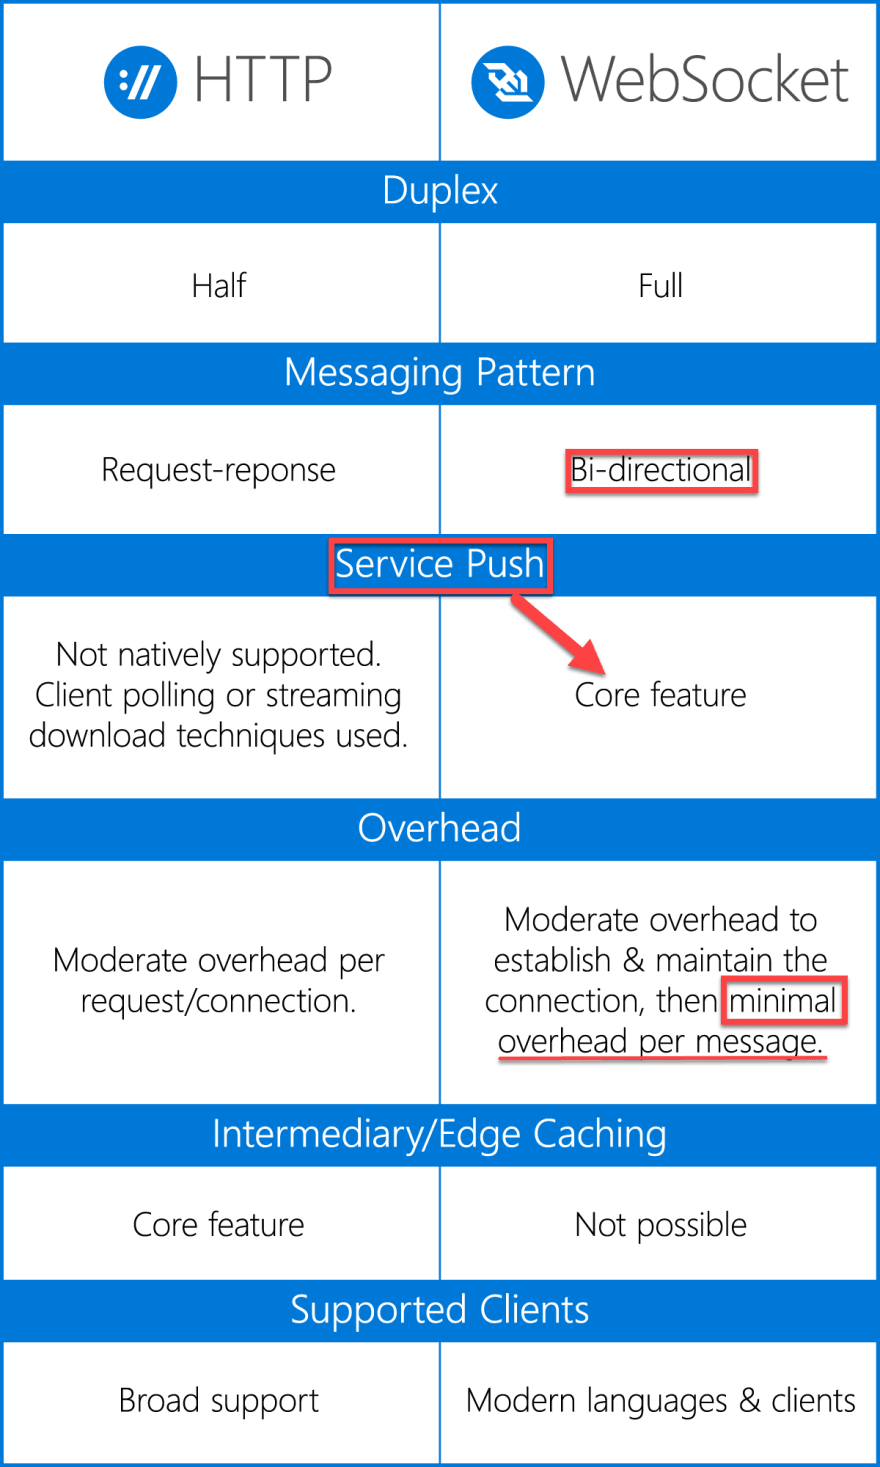 Image depicting the differences between HTTP and WebSockets